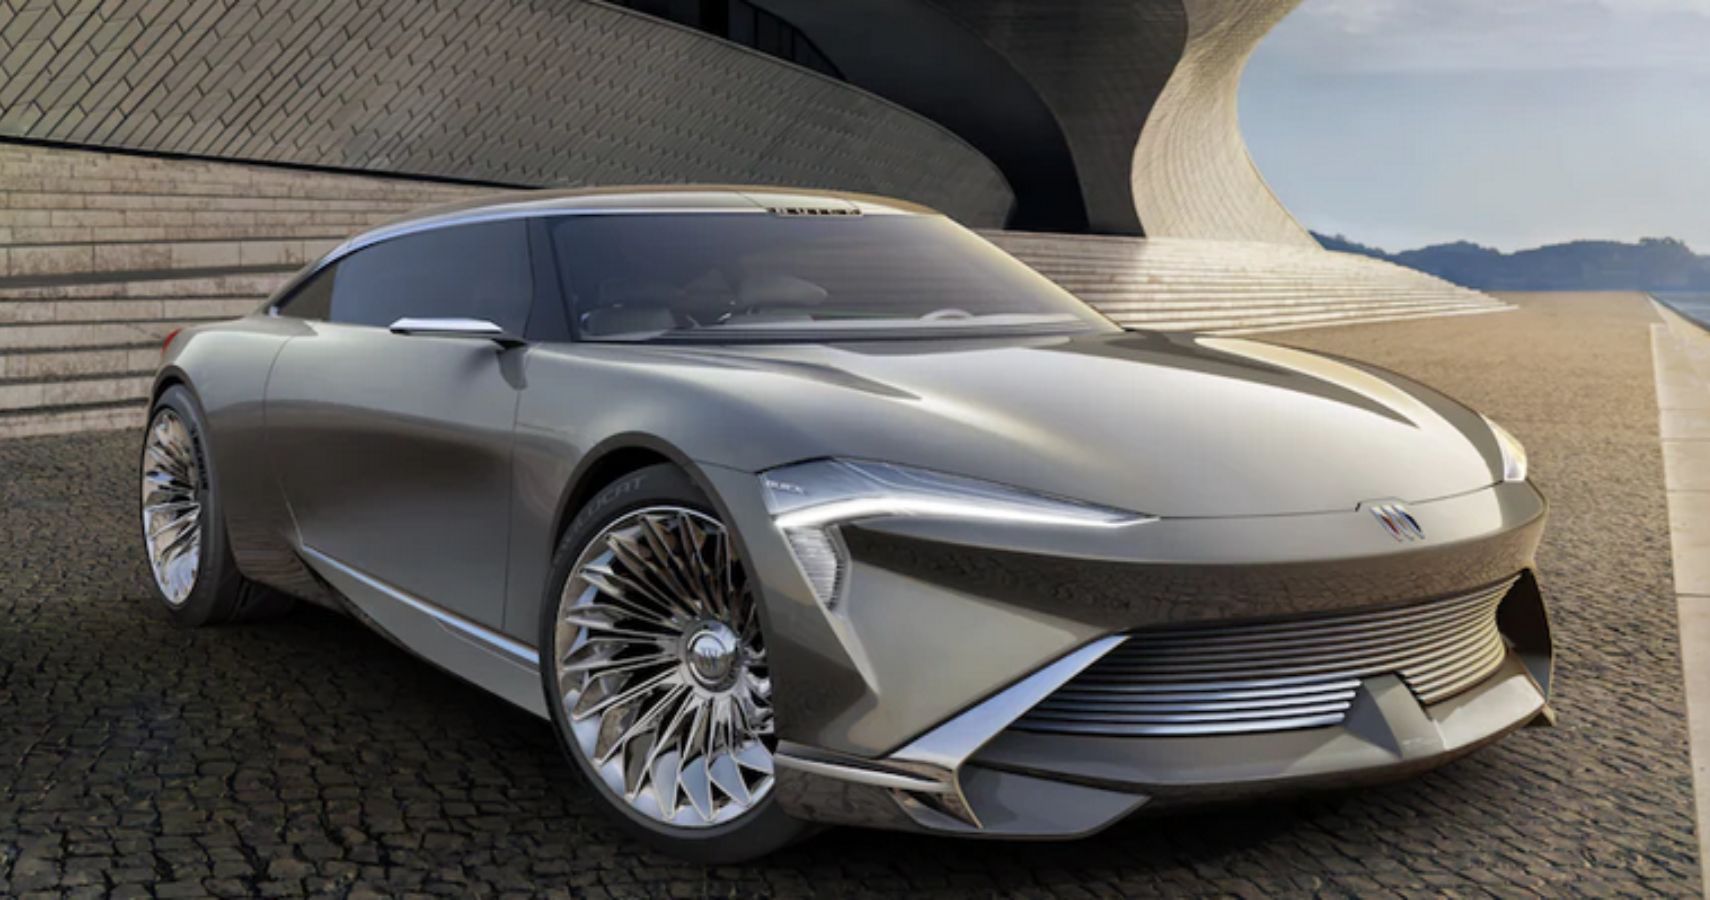 The Future Is Electric For Buick As They Introduce Their Wildcat EV Concept